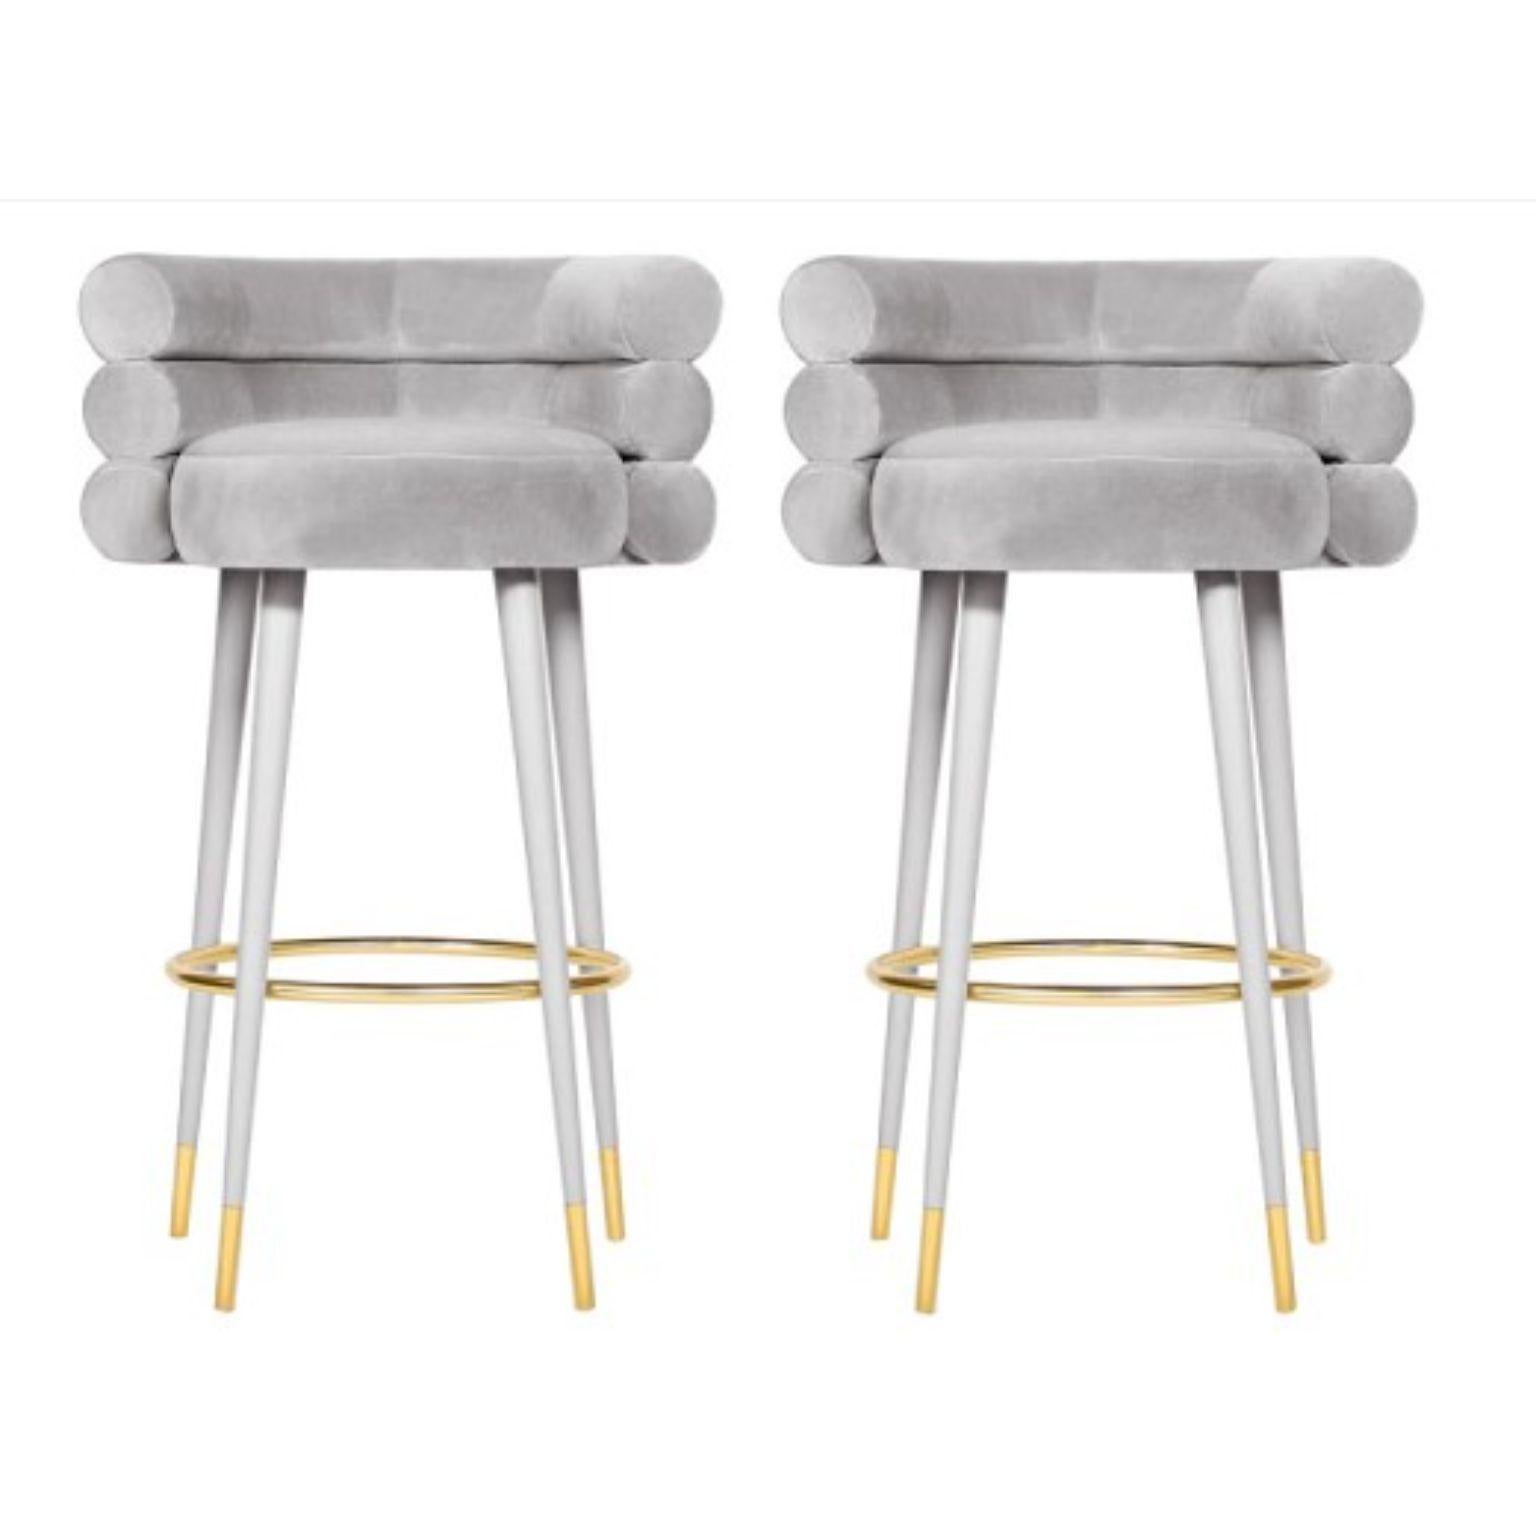 Set of 2 Marshmallow bar stools, Royal Stranger
Dimensions: 100 x 70 x 60 cm
Materials: Velvet upholstery, brass
Available in: Mint green, light pink, royal green, royal red

Royal stranger is an exclusive furniture brand determined to bring